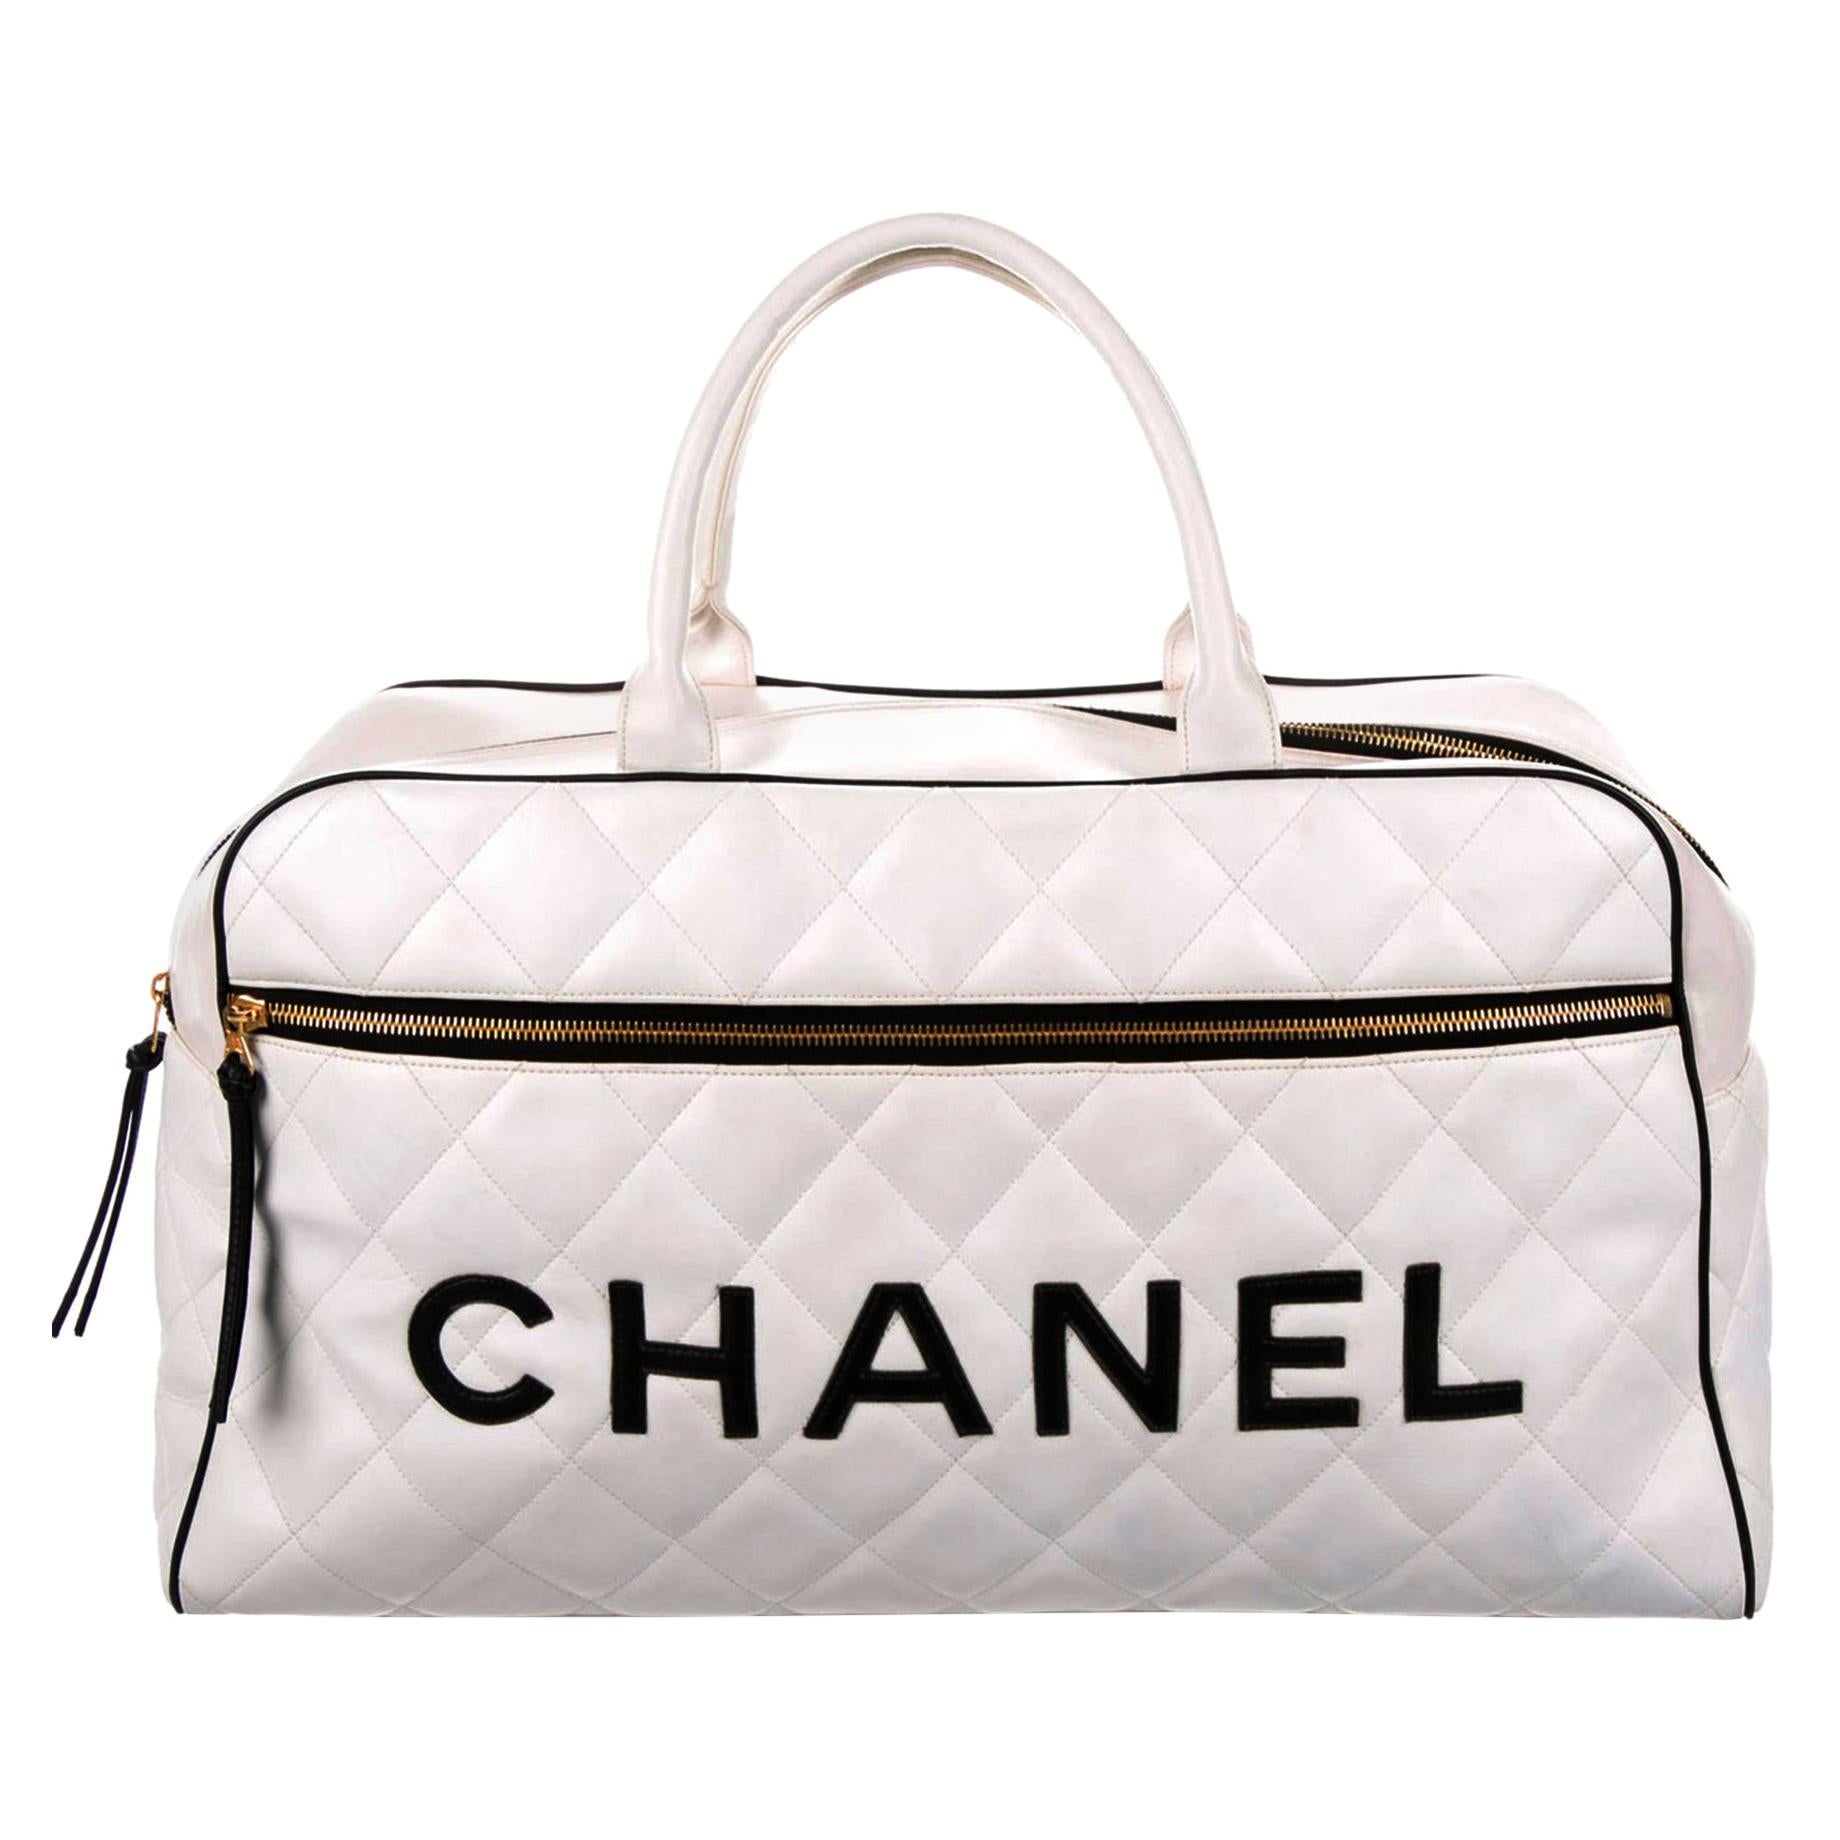 Chanel Limited Edition Vintage Duffel Tote White Leather Weekend Bag For Sale 1stDibs | chanel duffle bags, chanel bag, chanel gym bag